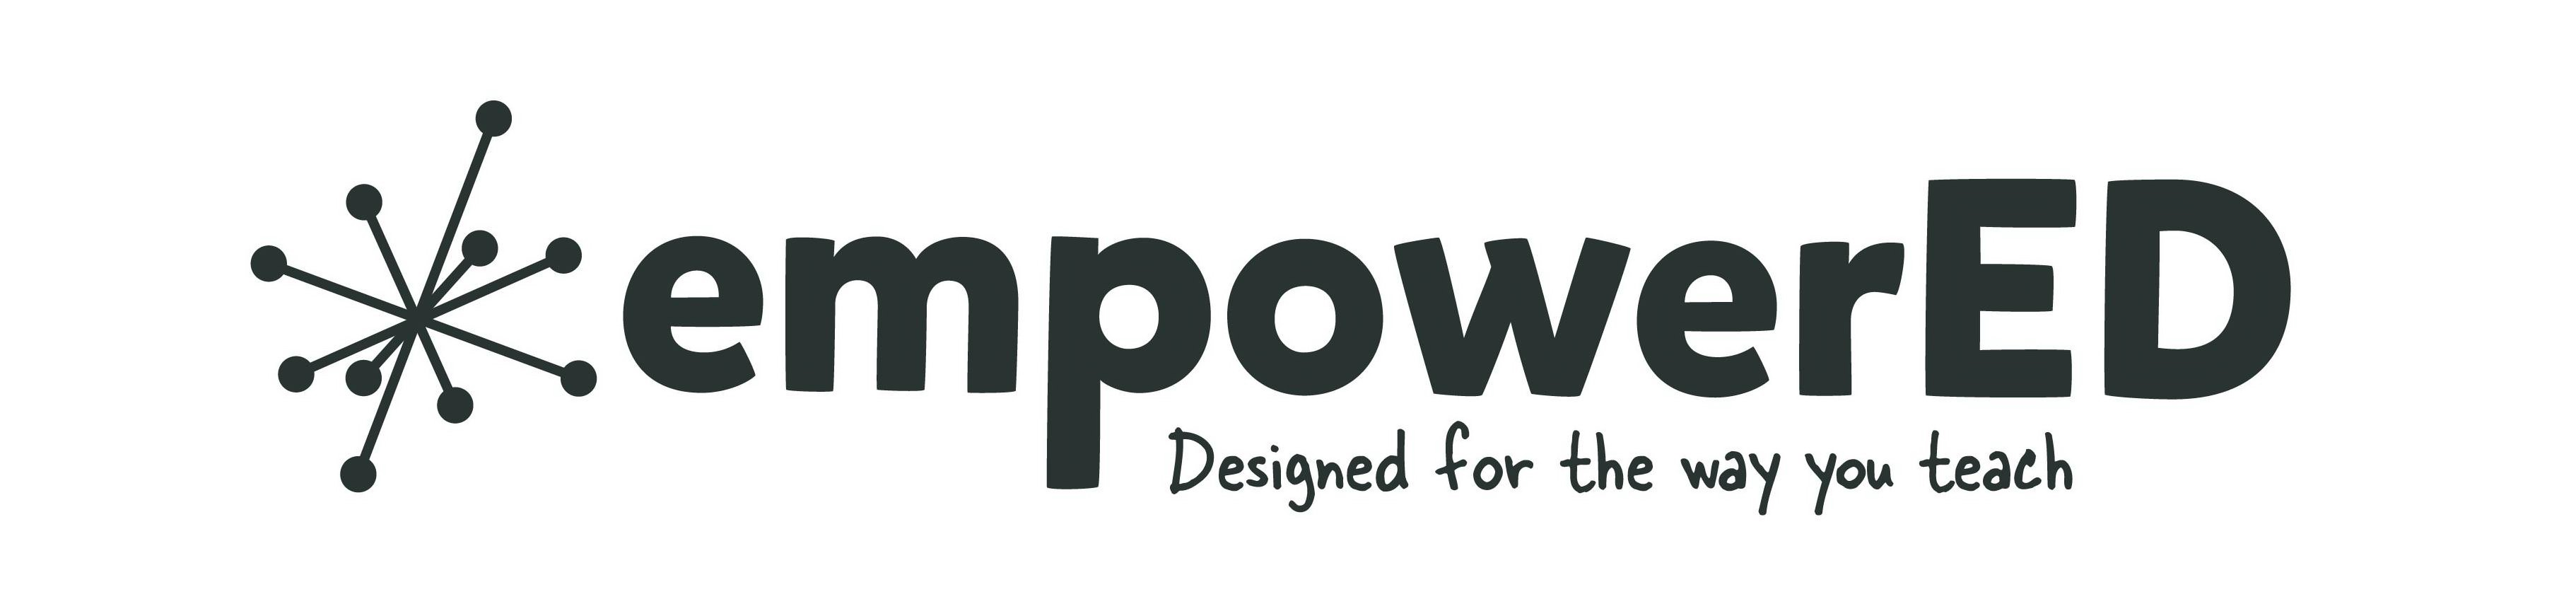  EMPOWERED DESIGNED FOR THE WAY YOU TEACH